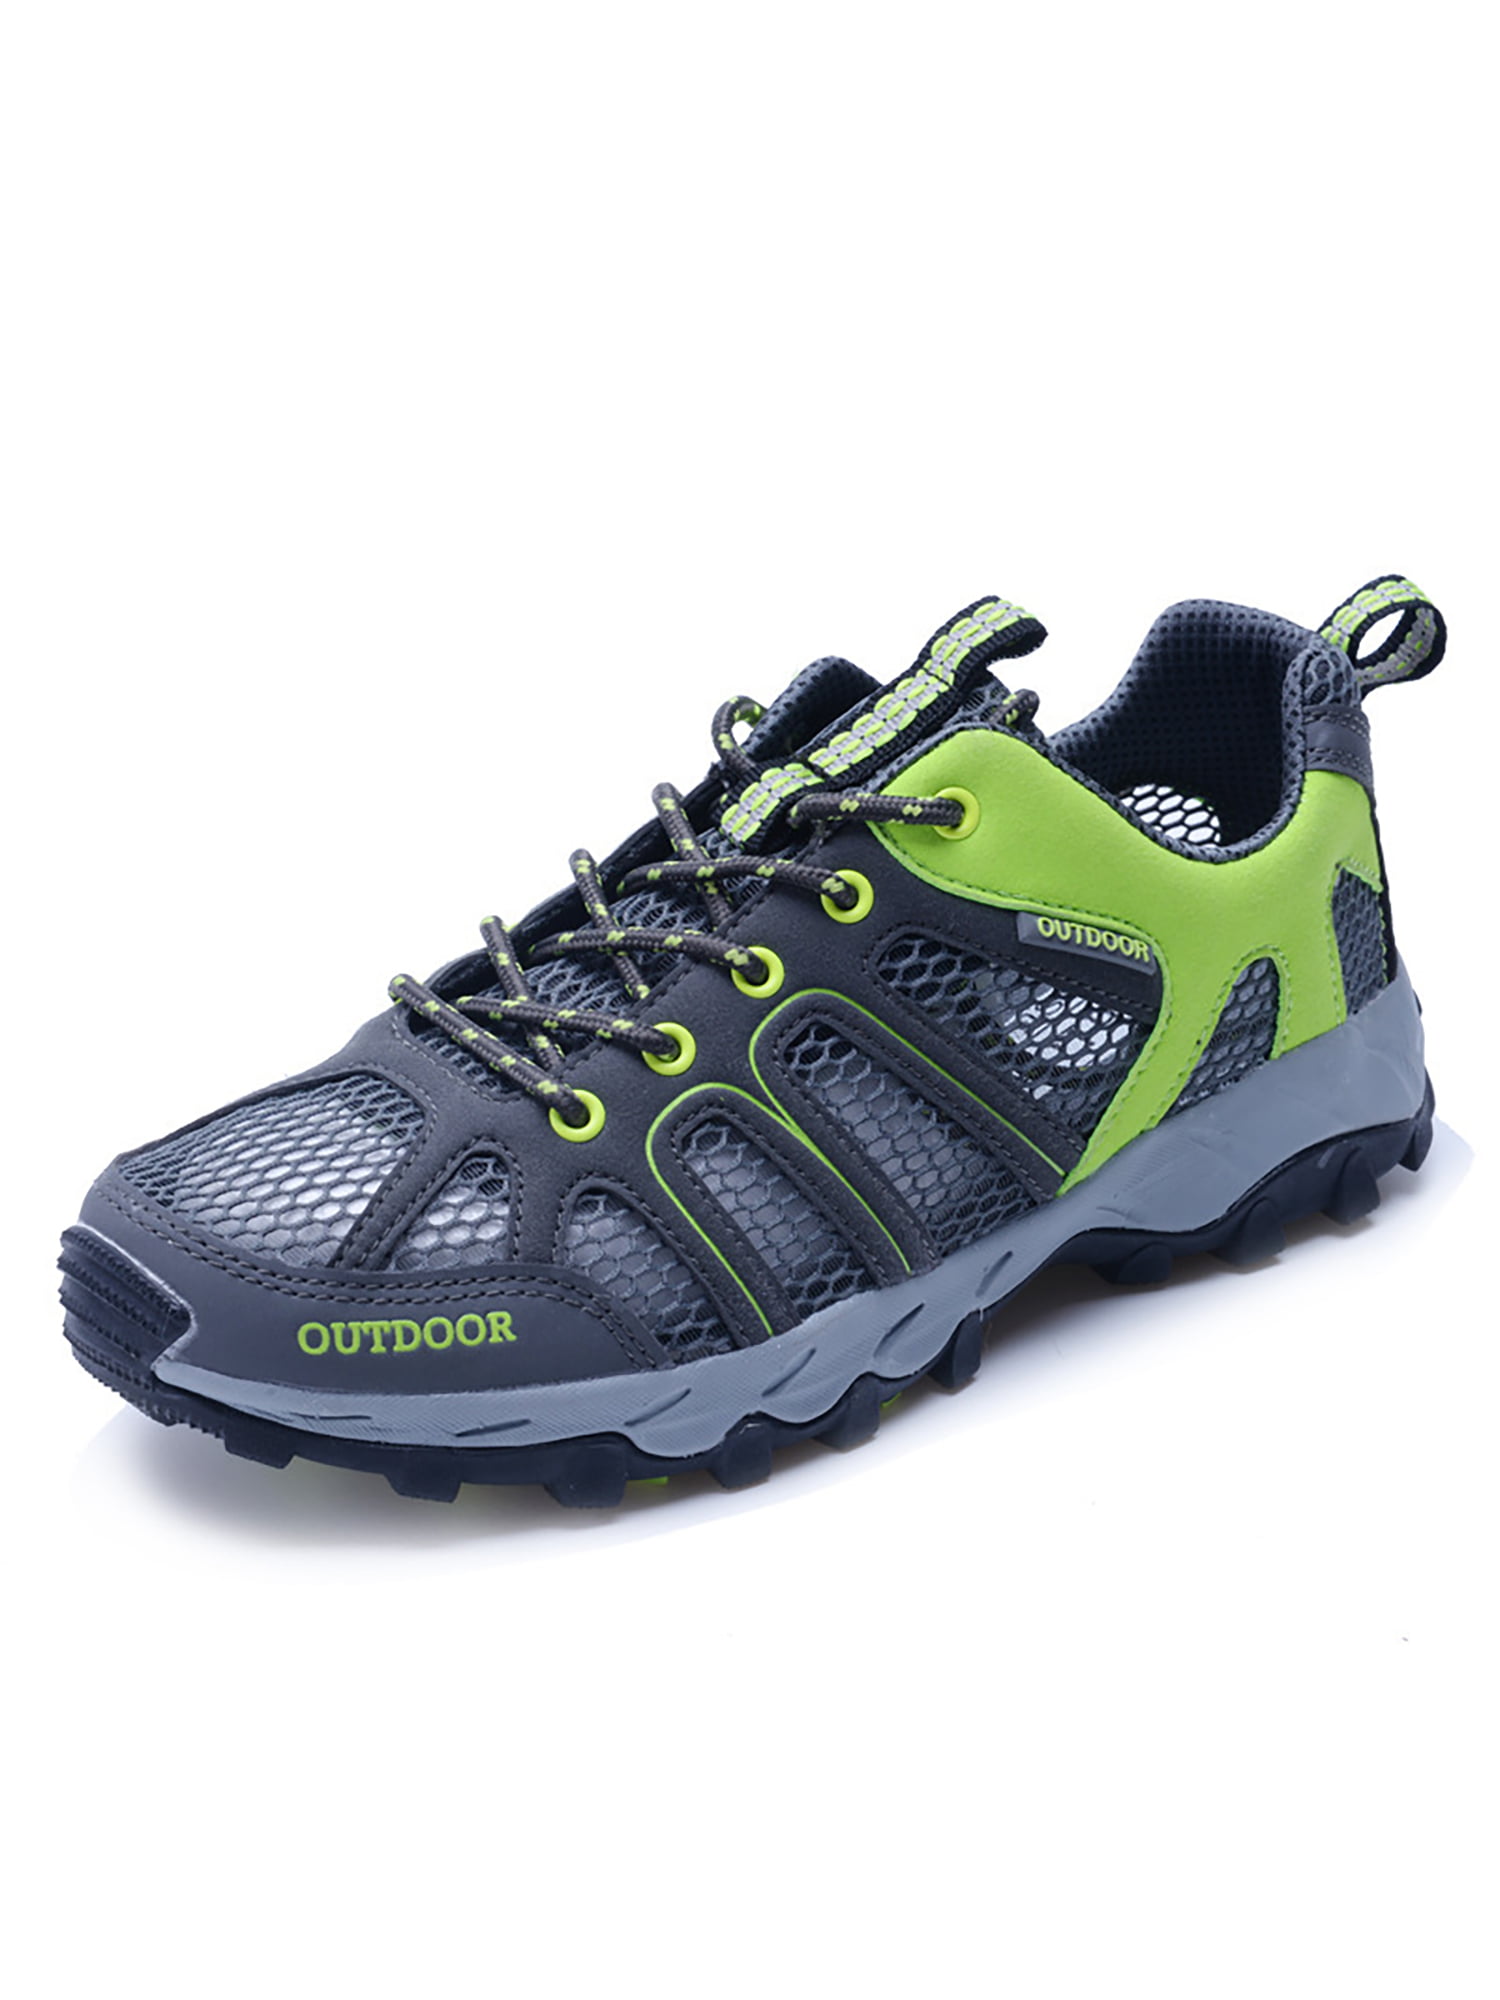 NEW MENS HIKING WATER WALKING ANKLE OUTDOOR TRAIL TREKKING TRAINERS SHOES SIZE 